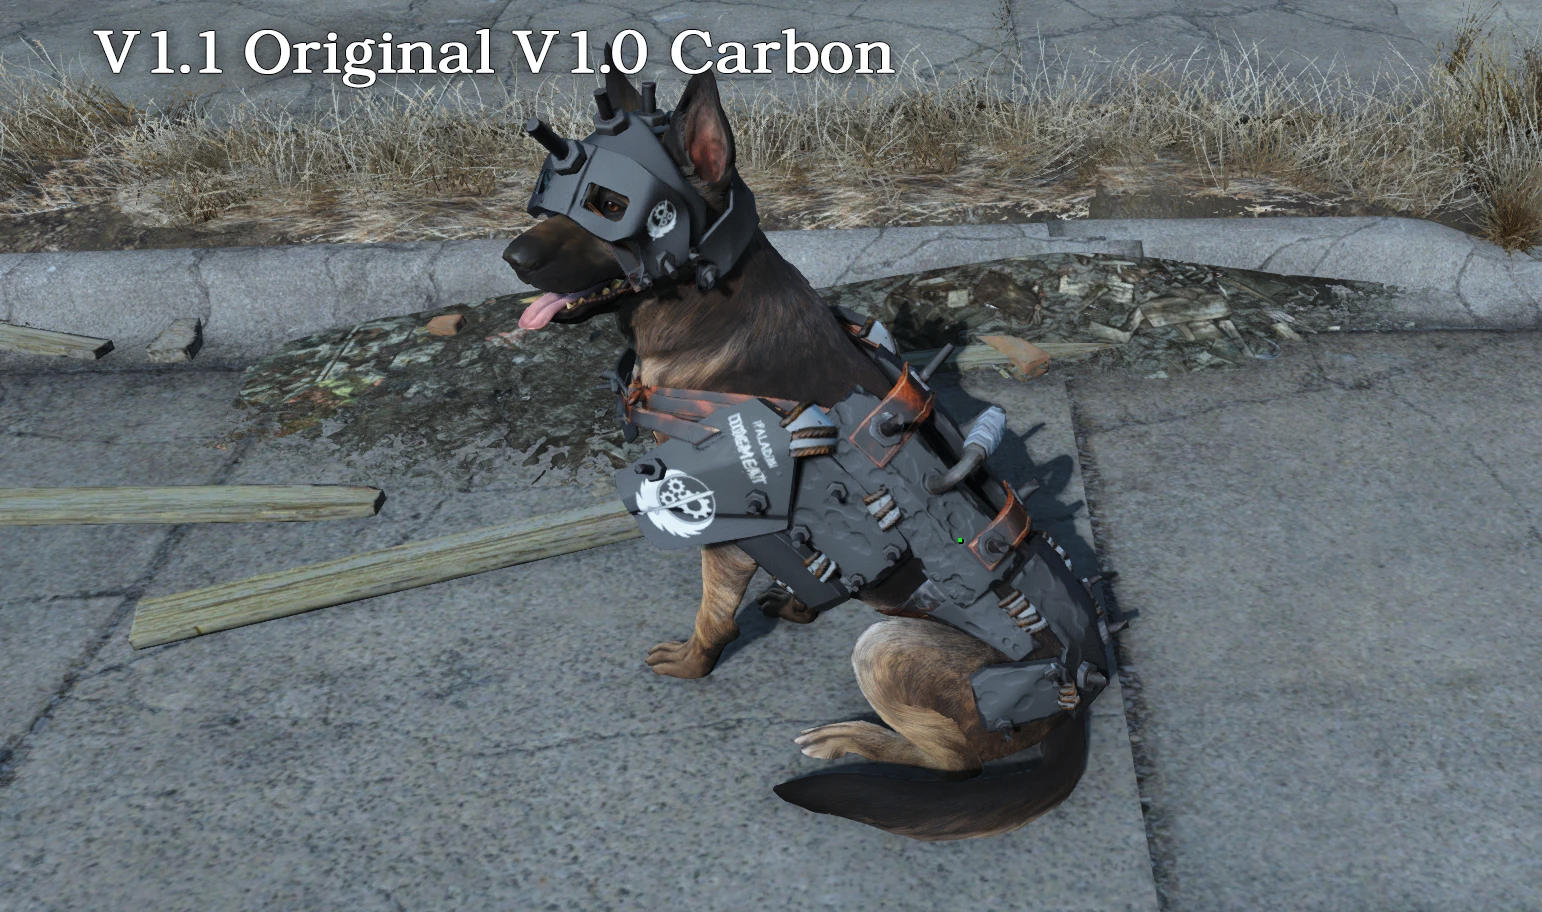 fallout 4 where is dogmeat